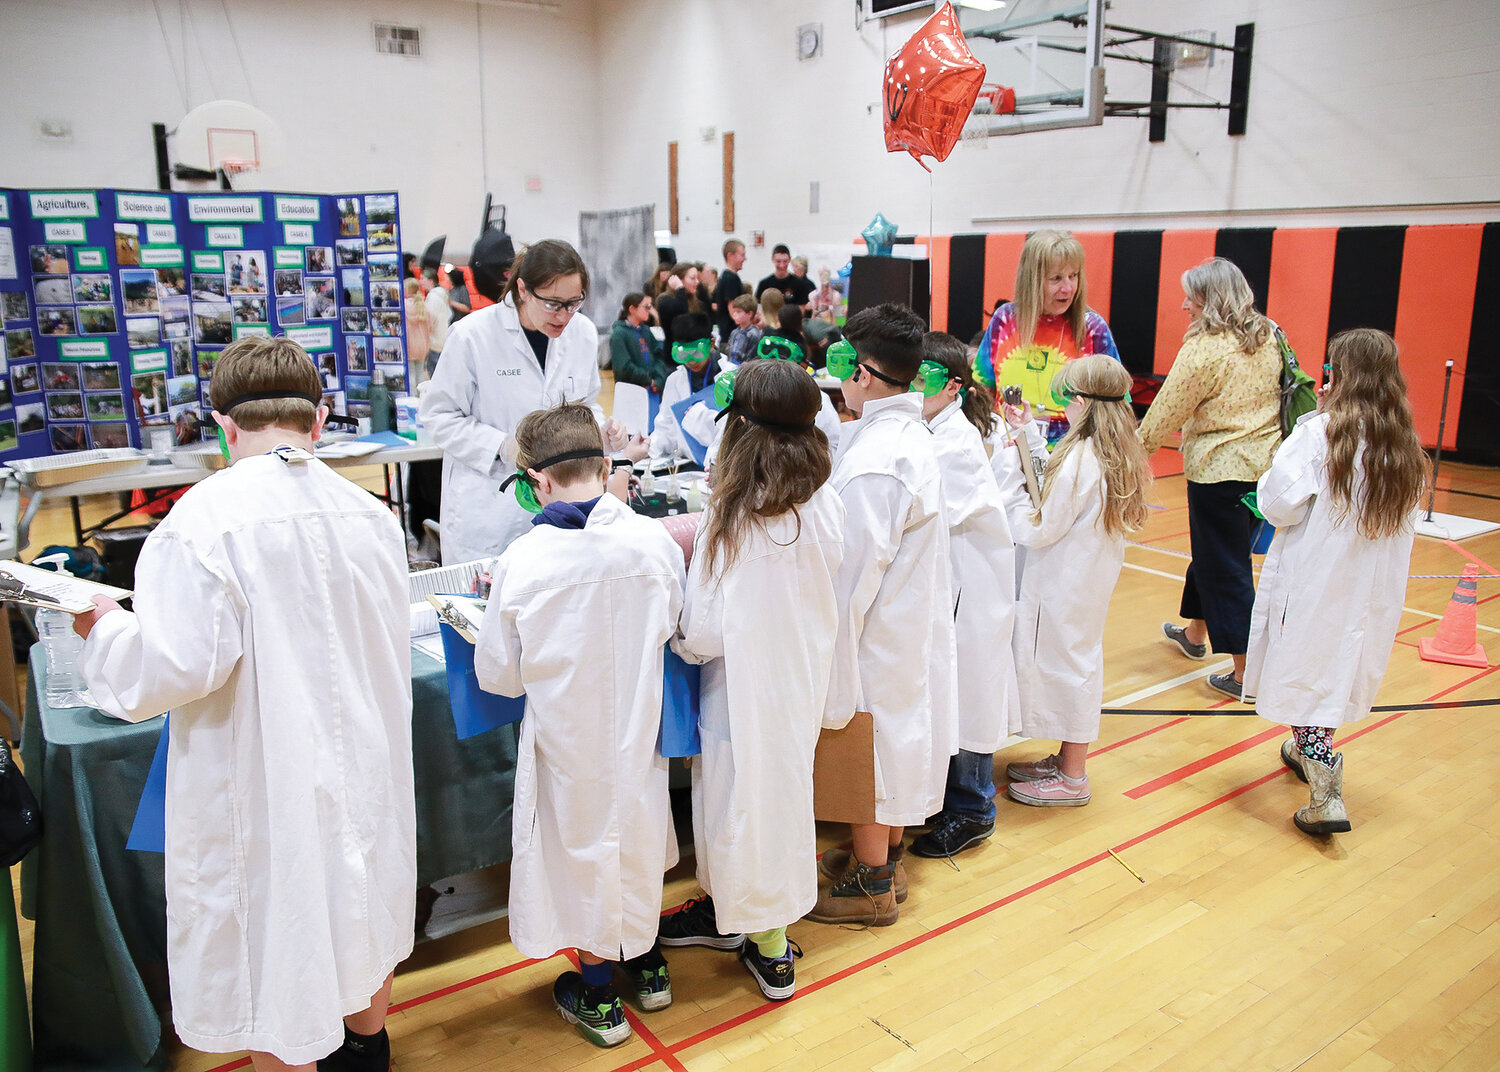 Students take part in an activity at the CASEE Center’s table during the fourth grade career fair at Battle Ground High School on Tuesday, May 30.